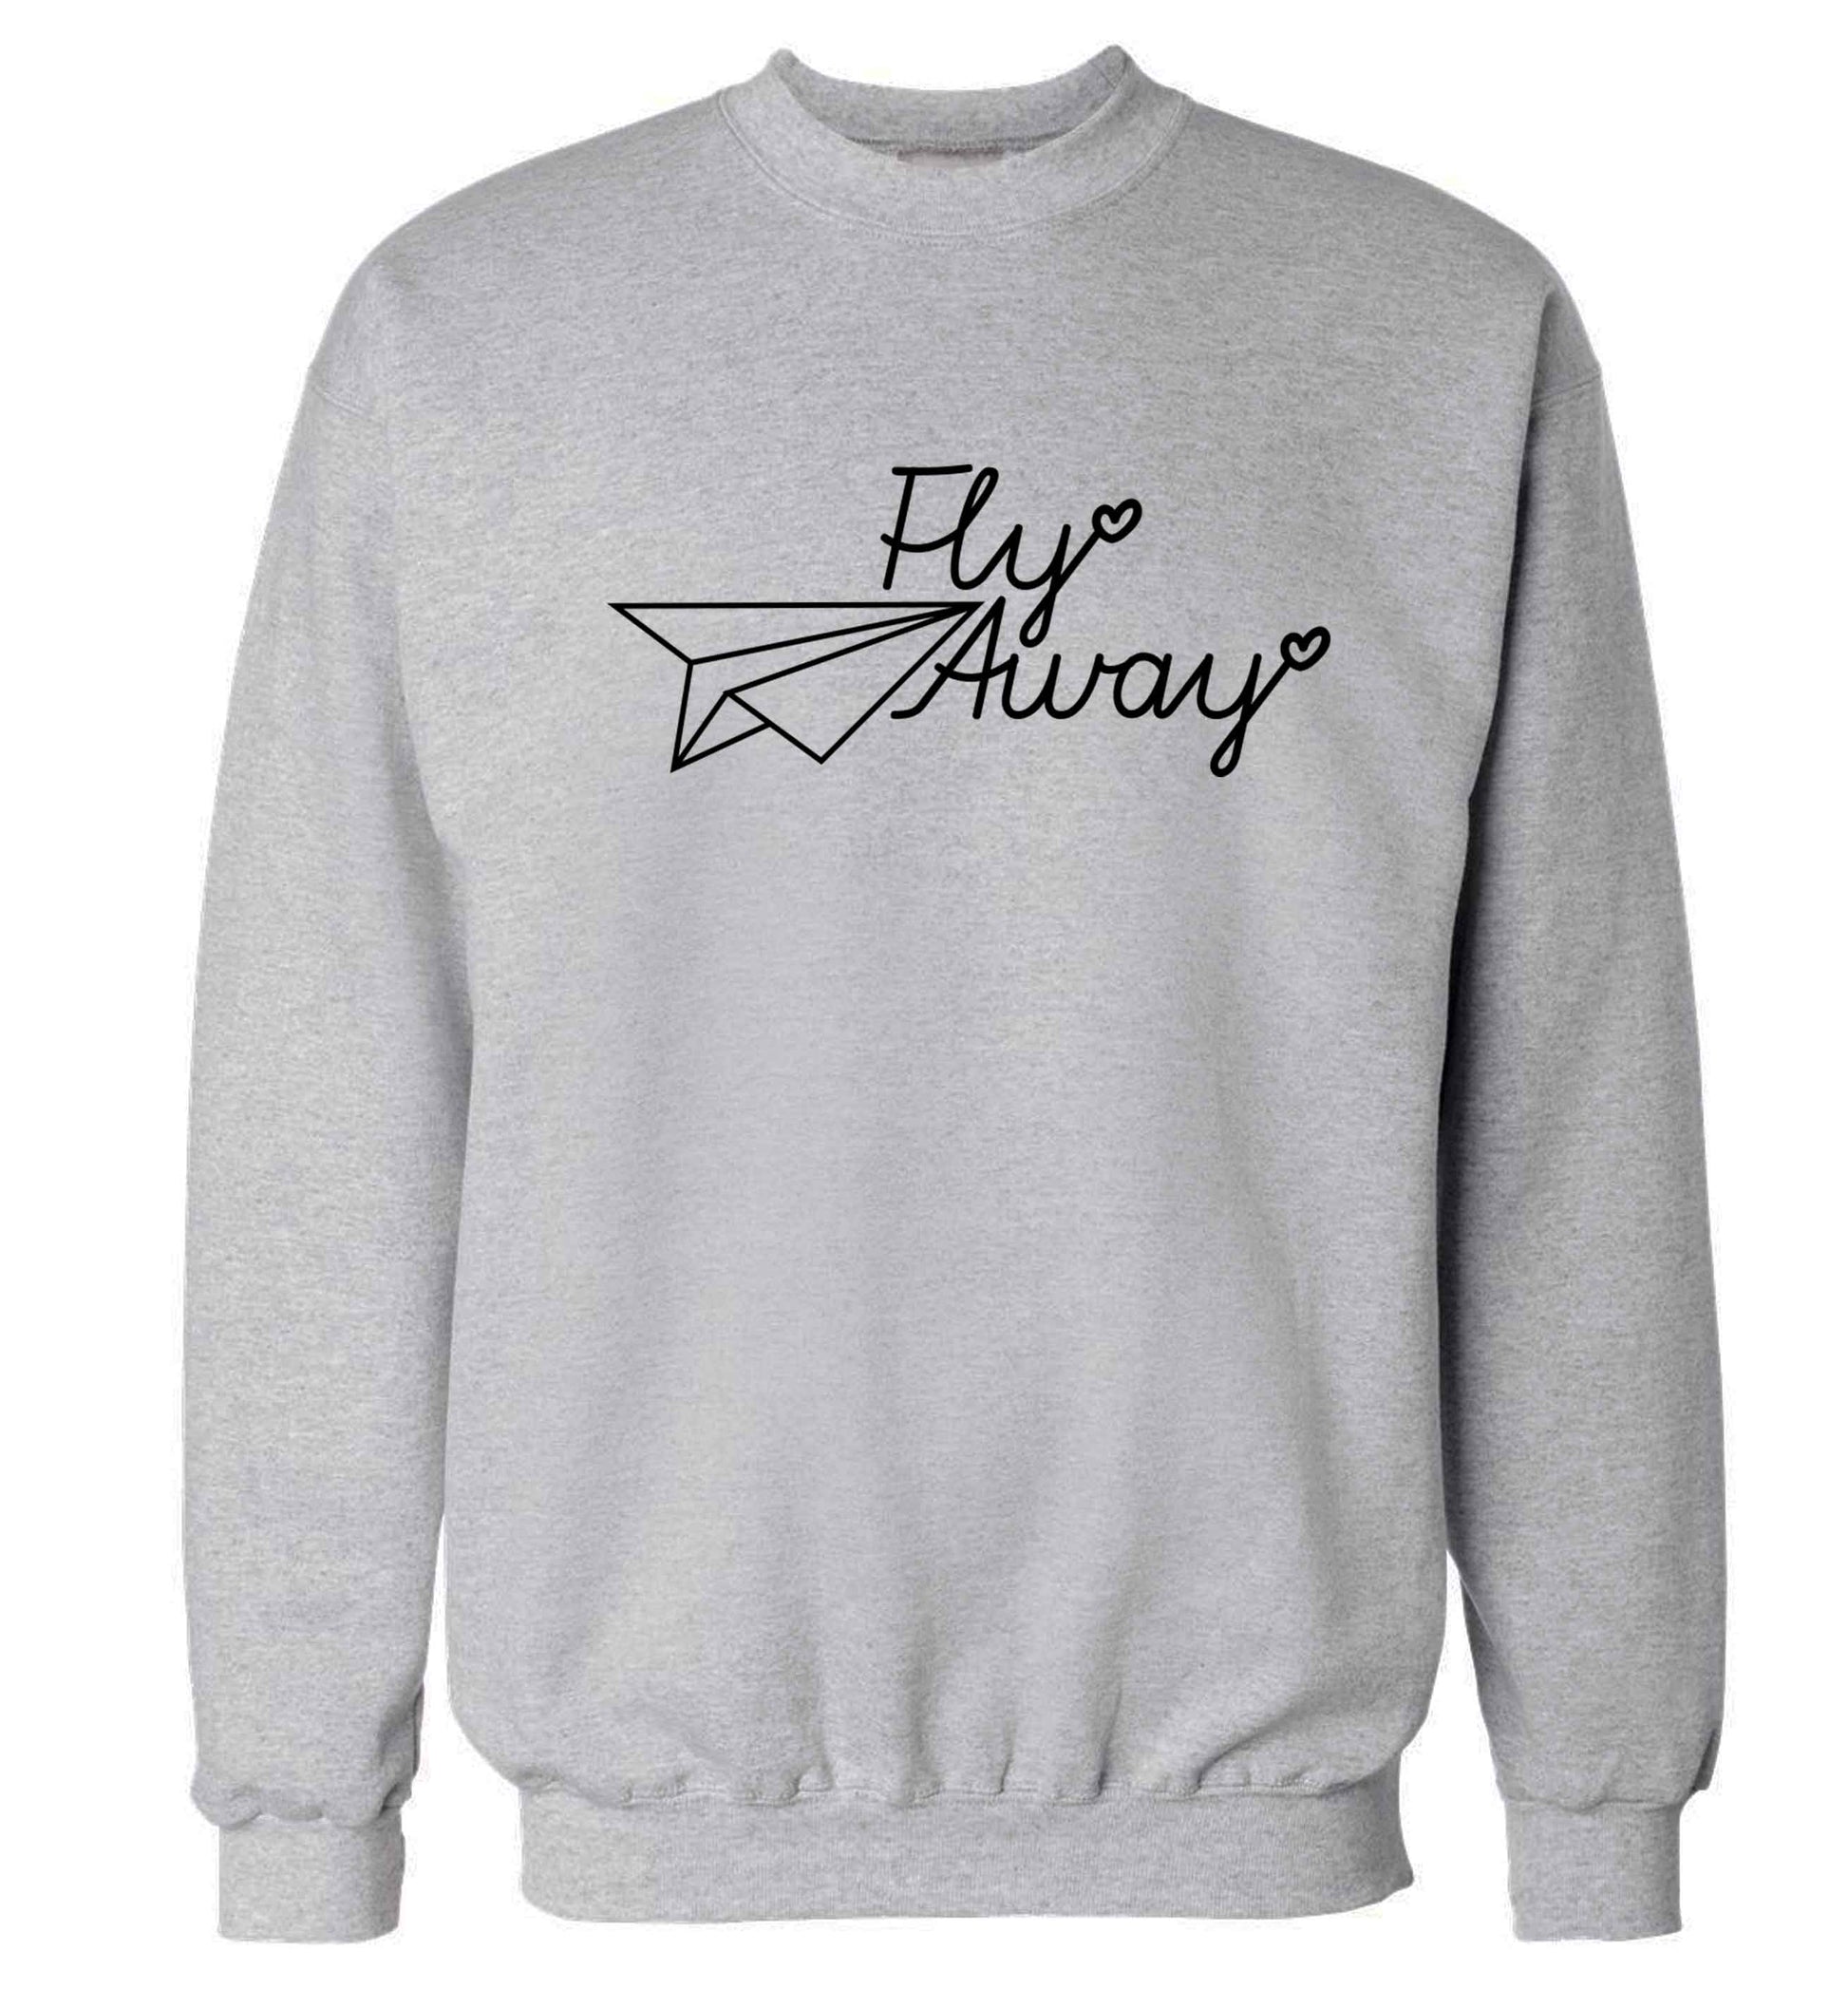 Fly away Adult's unisex grey Sweater 2XL